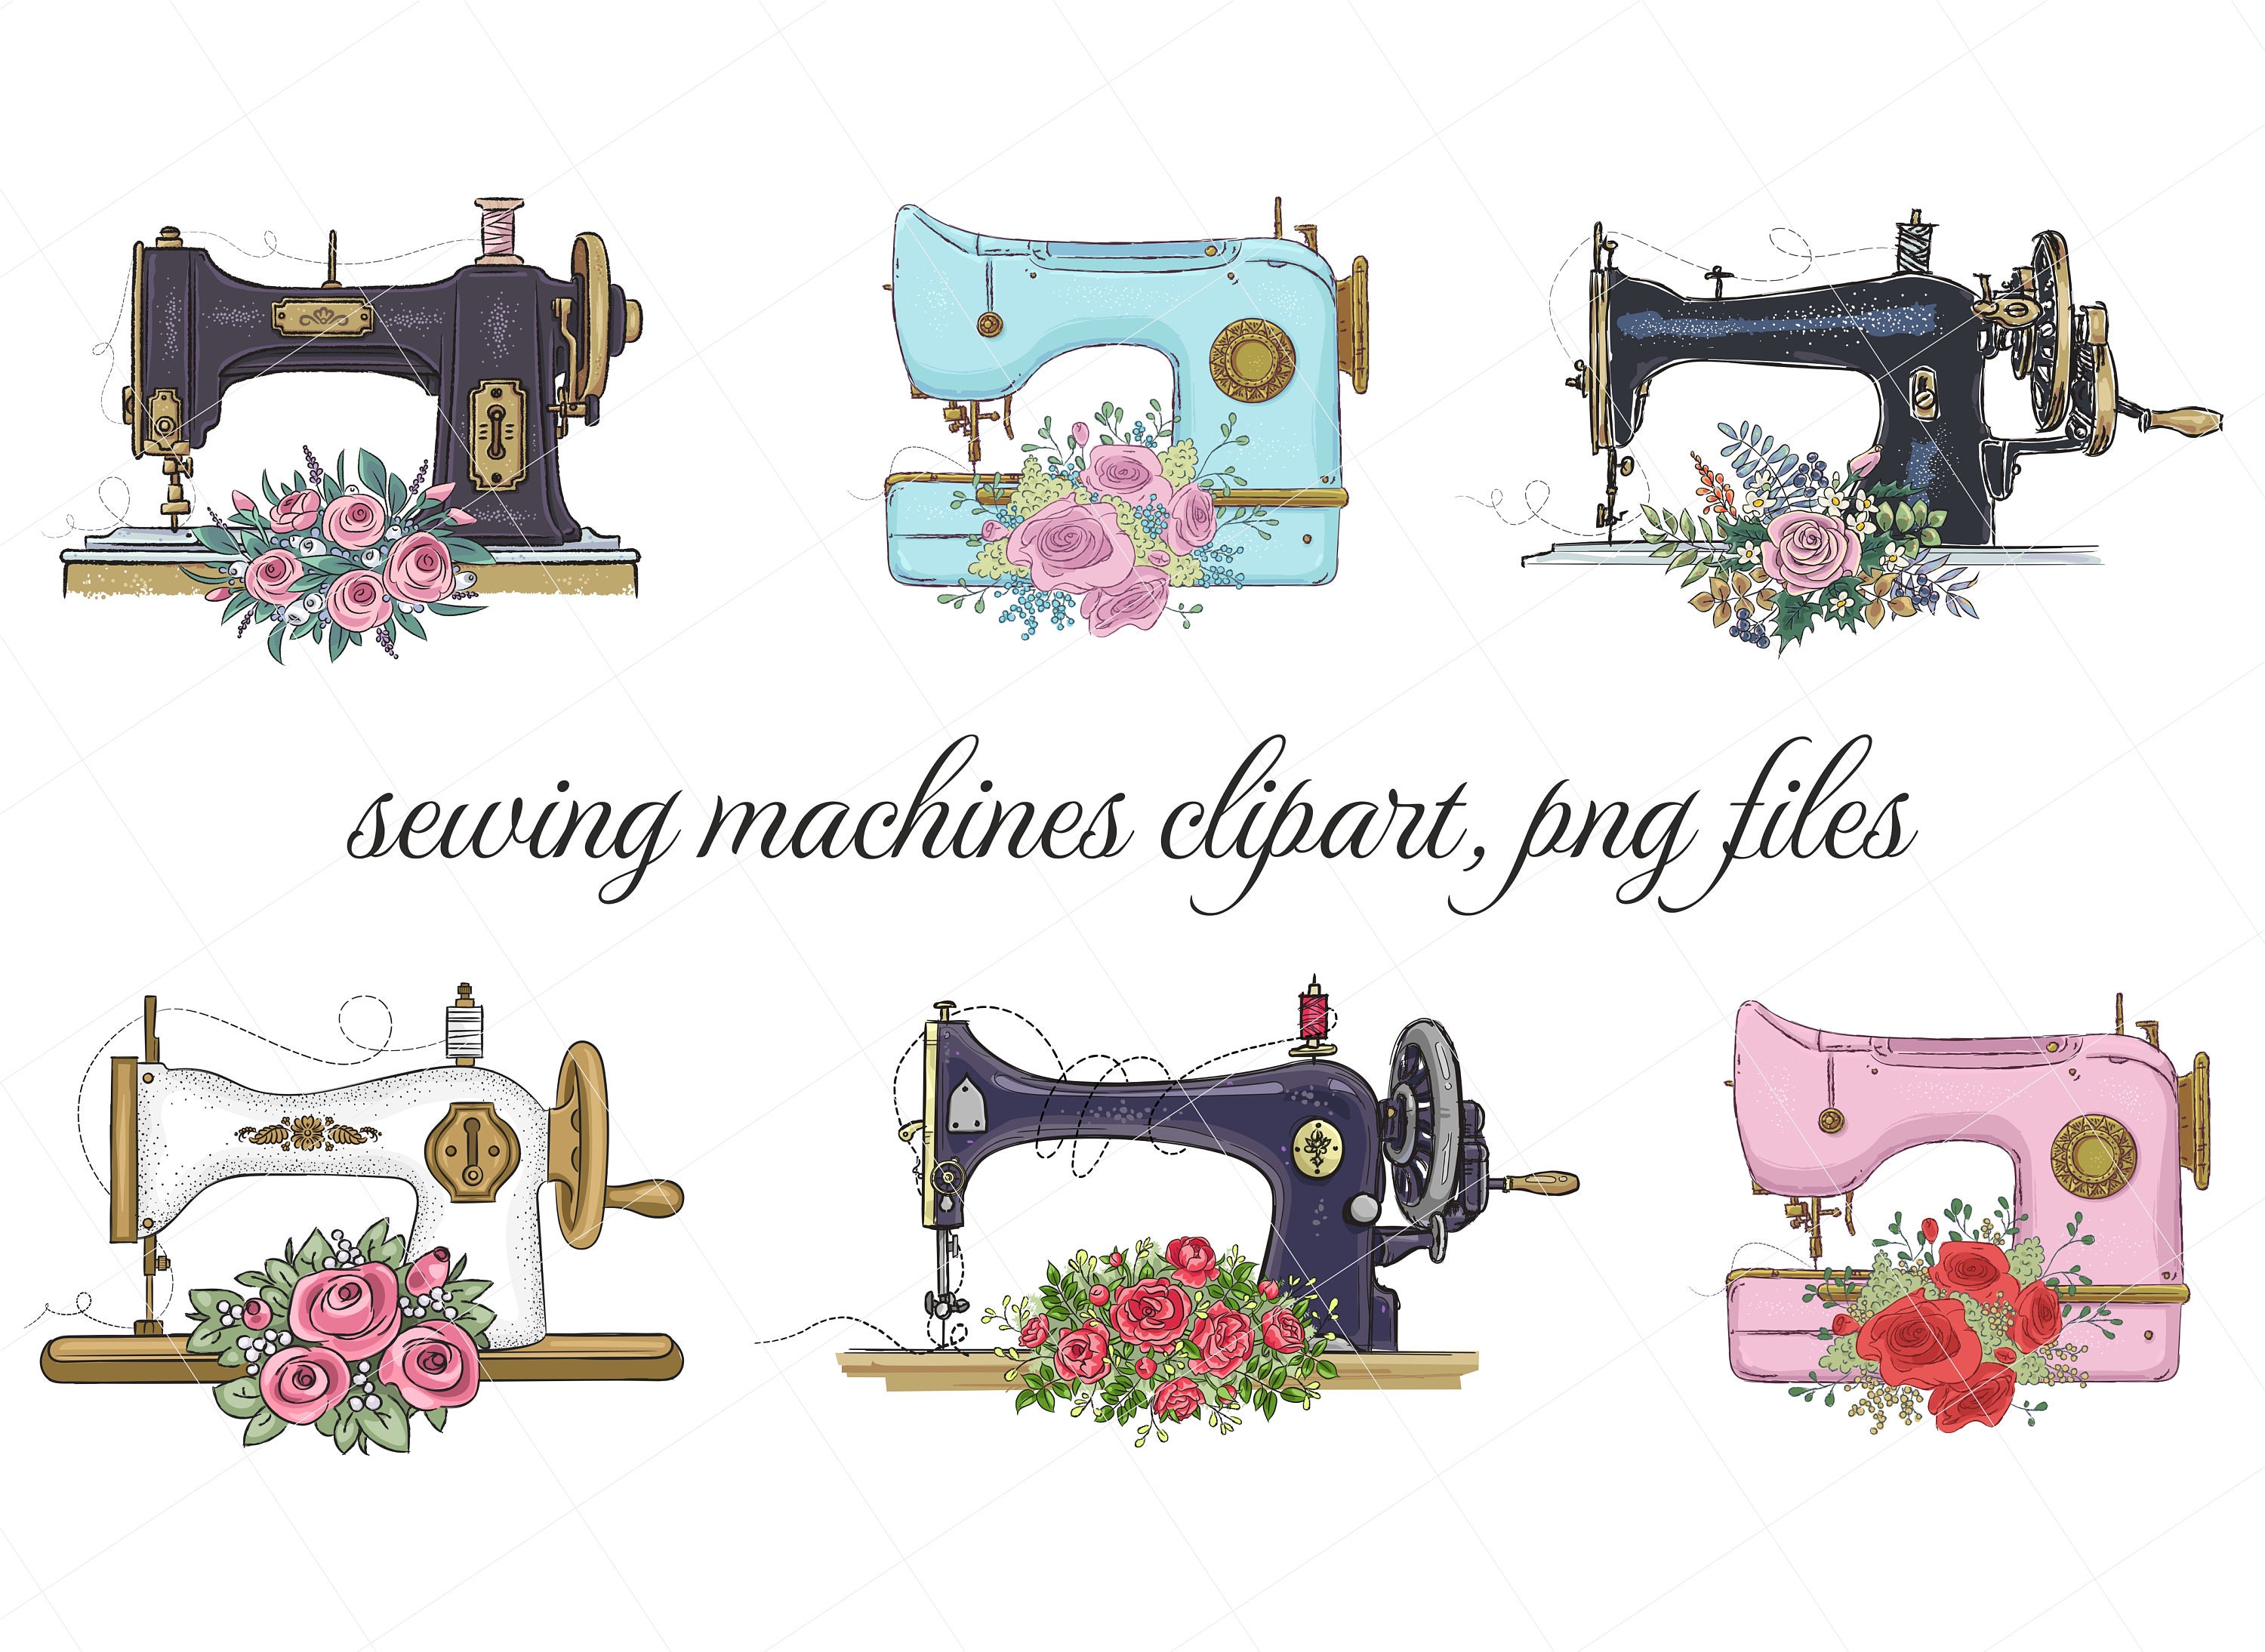 Watercolor Vintage Sewing Kit Clip Art. Branding Kit, Sewing Machine,  Needle, Stitching, Scissors, Dummy Model DIY Clipart. 